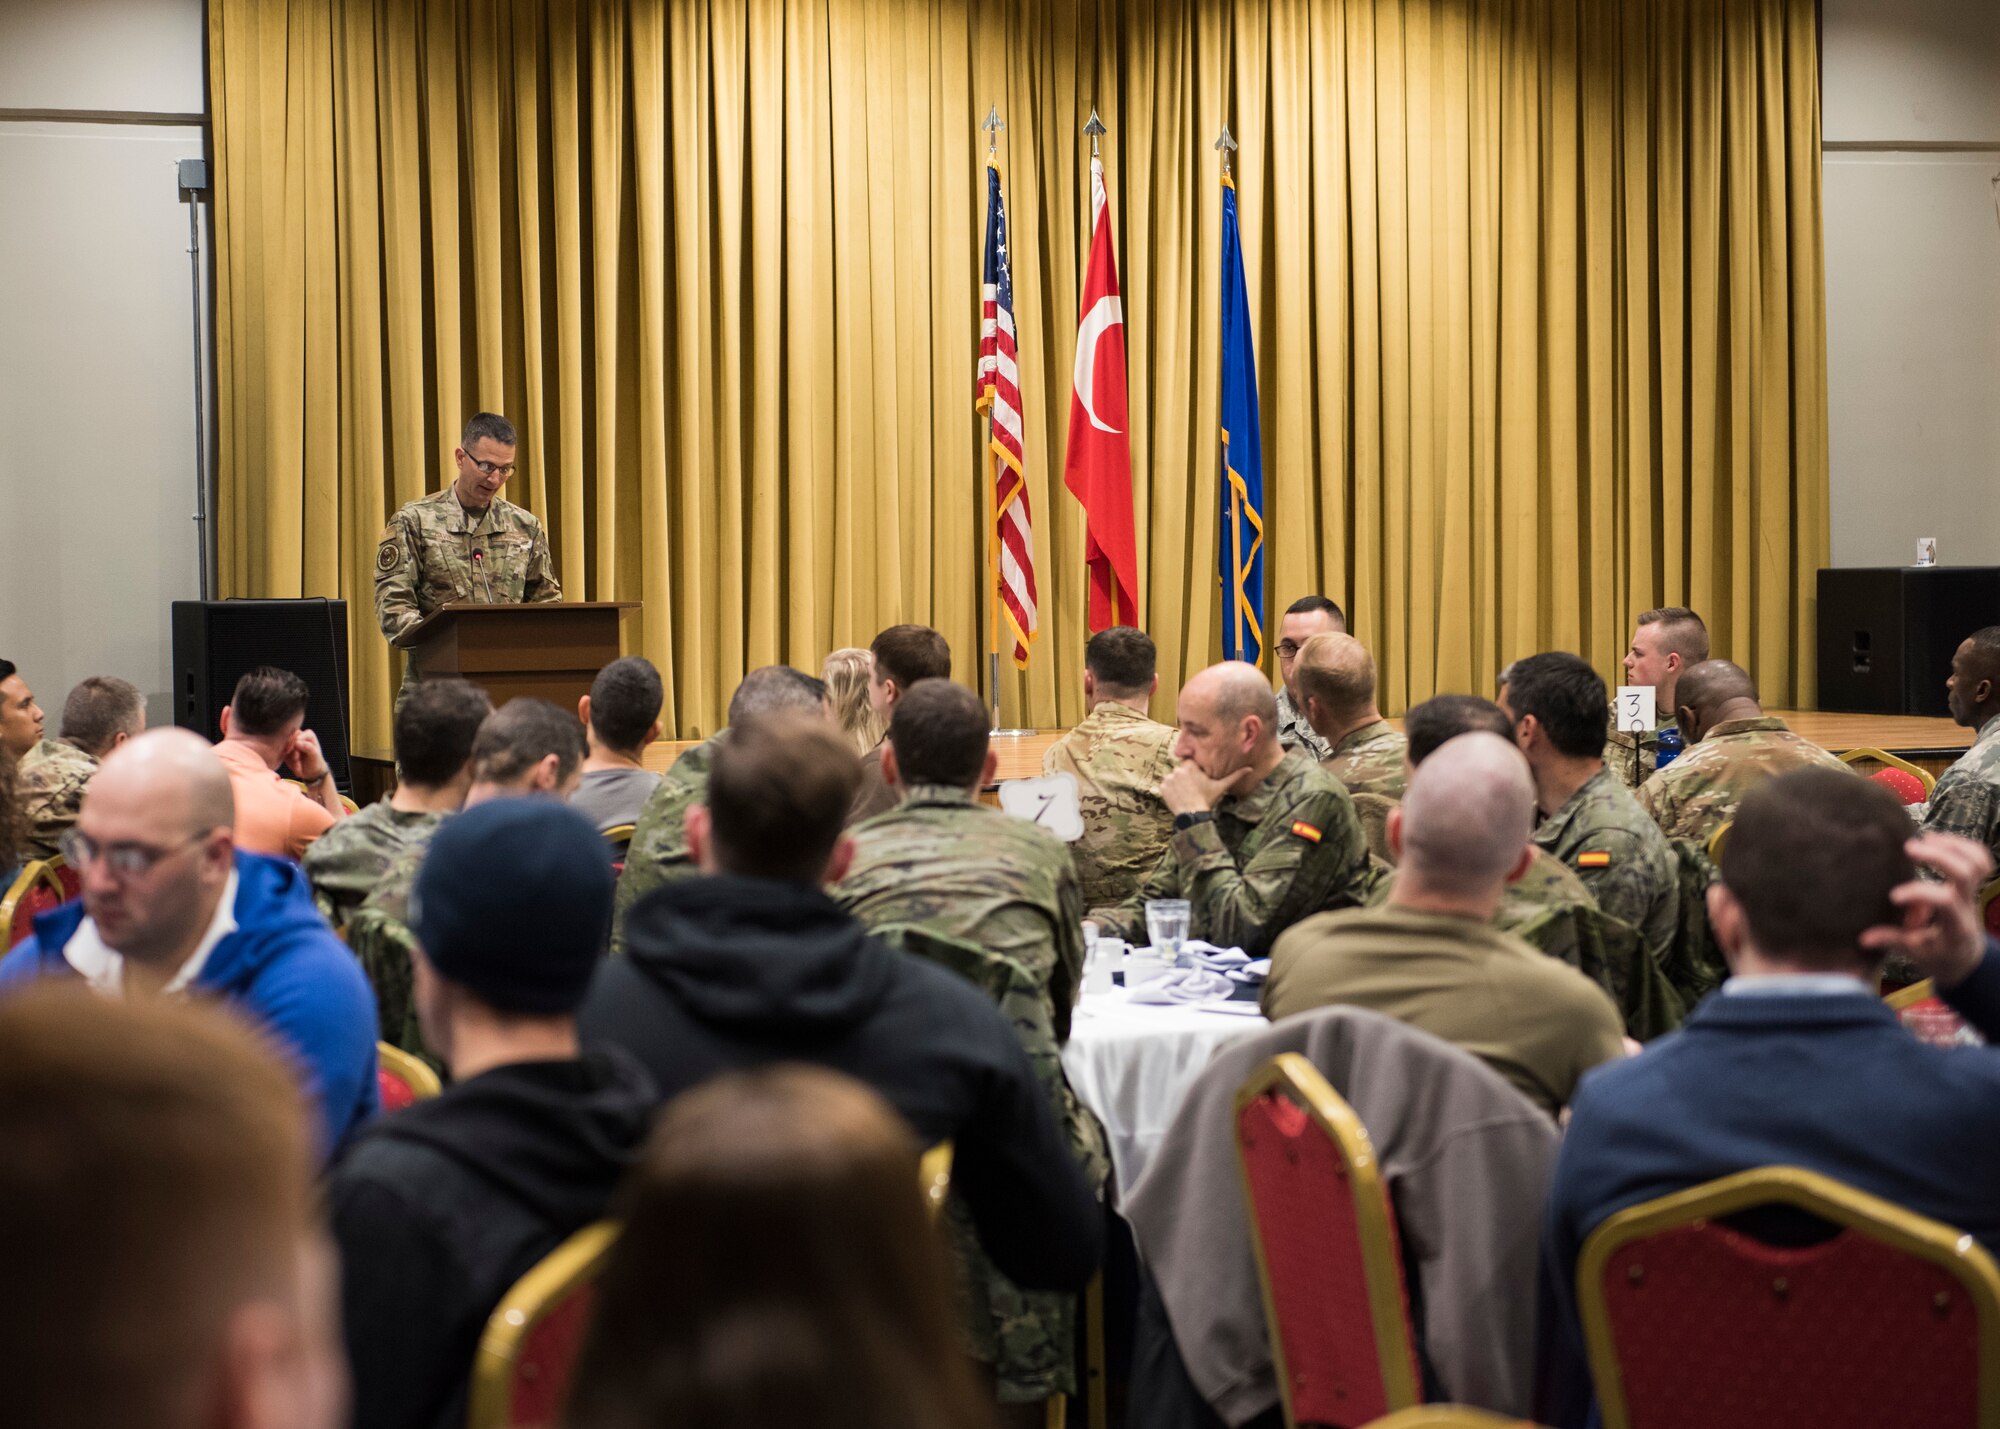 U.S. Air Force Col. Trent Davis, U.S. Air Forces in Europe and Air Forces Africa command chaplain, presides over the National Prayer Breakfast, Feb. 20, 2020, at Incirlik Air Base, Turkey. U.S. and Spanish service members, as well as civilian employees, attended the breakfast. (U.S. Air Force photo by Senior Airman Matthew Angulo)